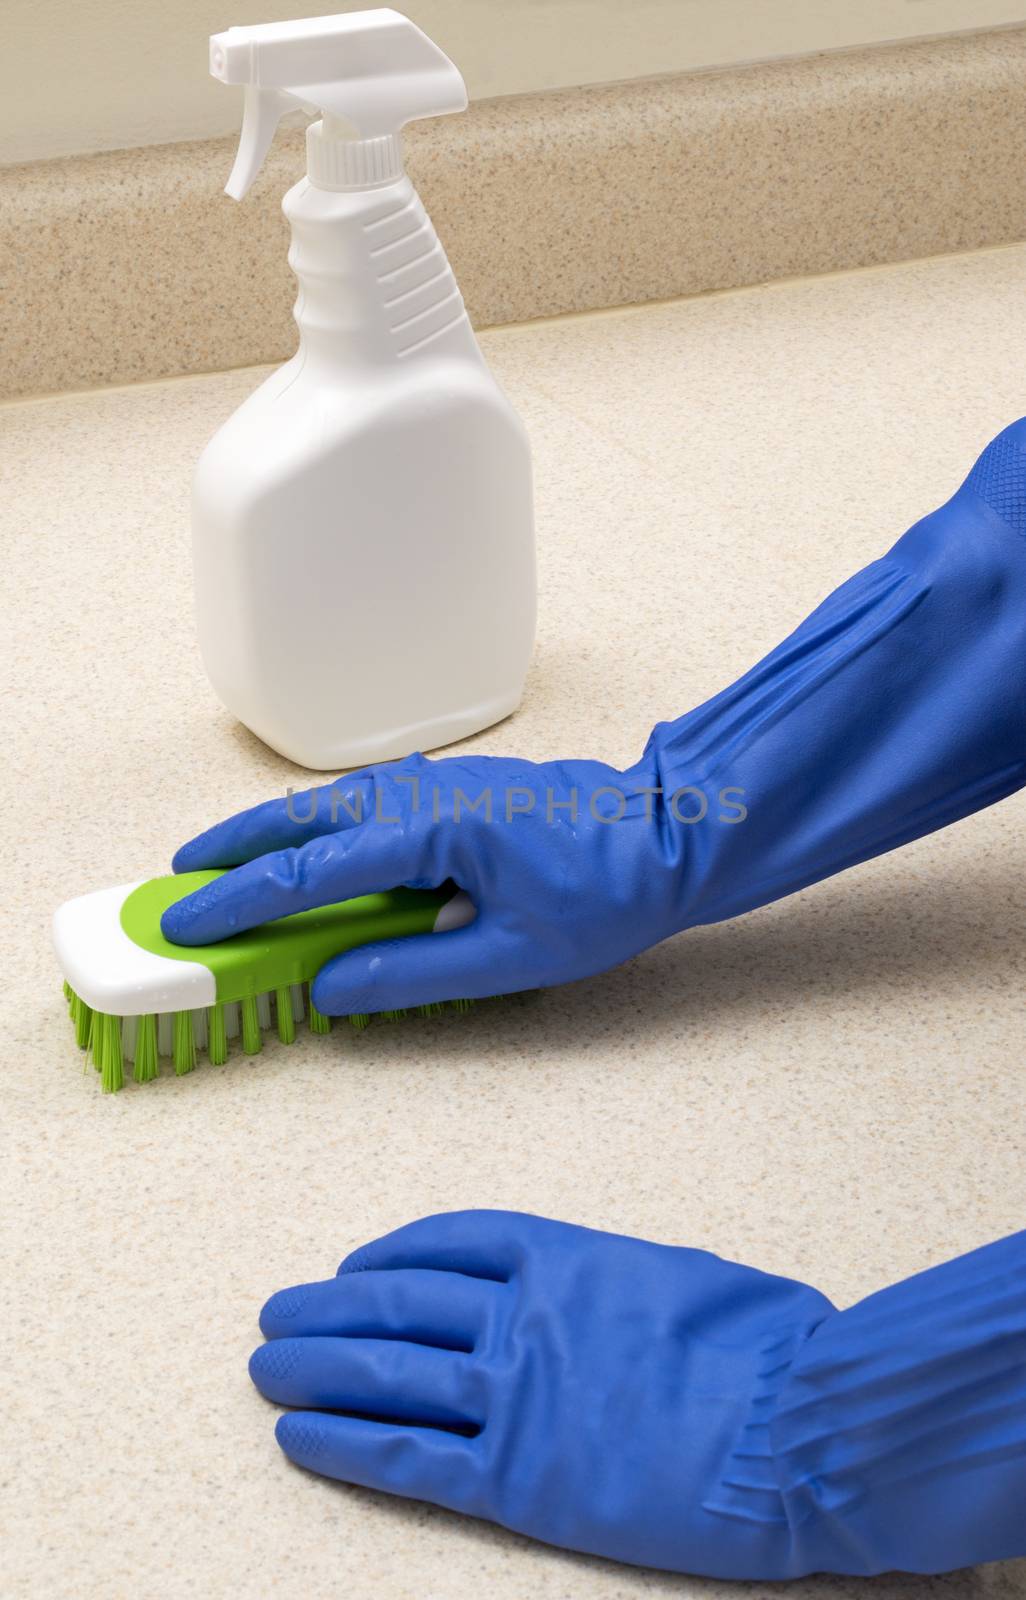 Cleaning Kitchen Counter With Scrub Brush by stockbuster1